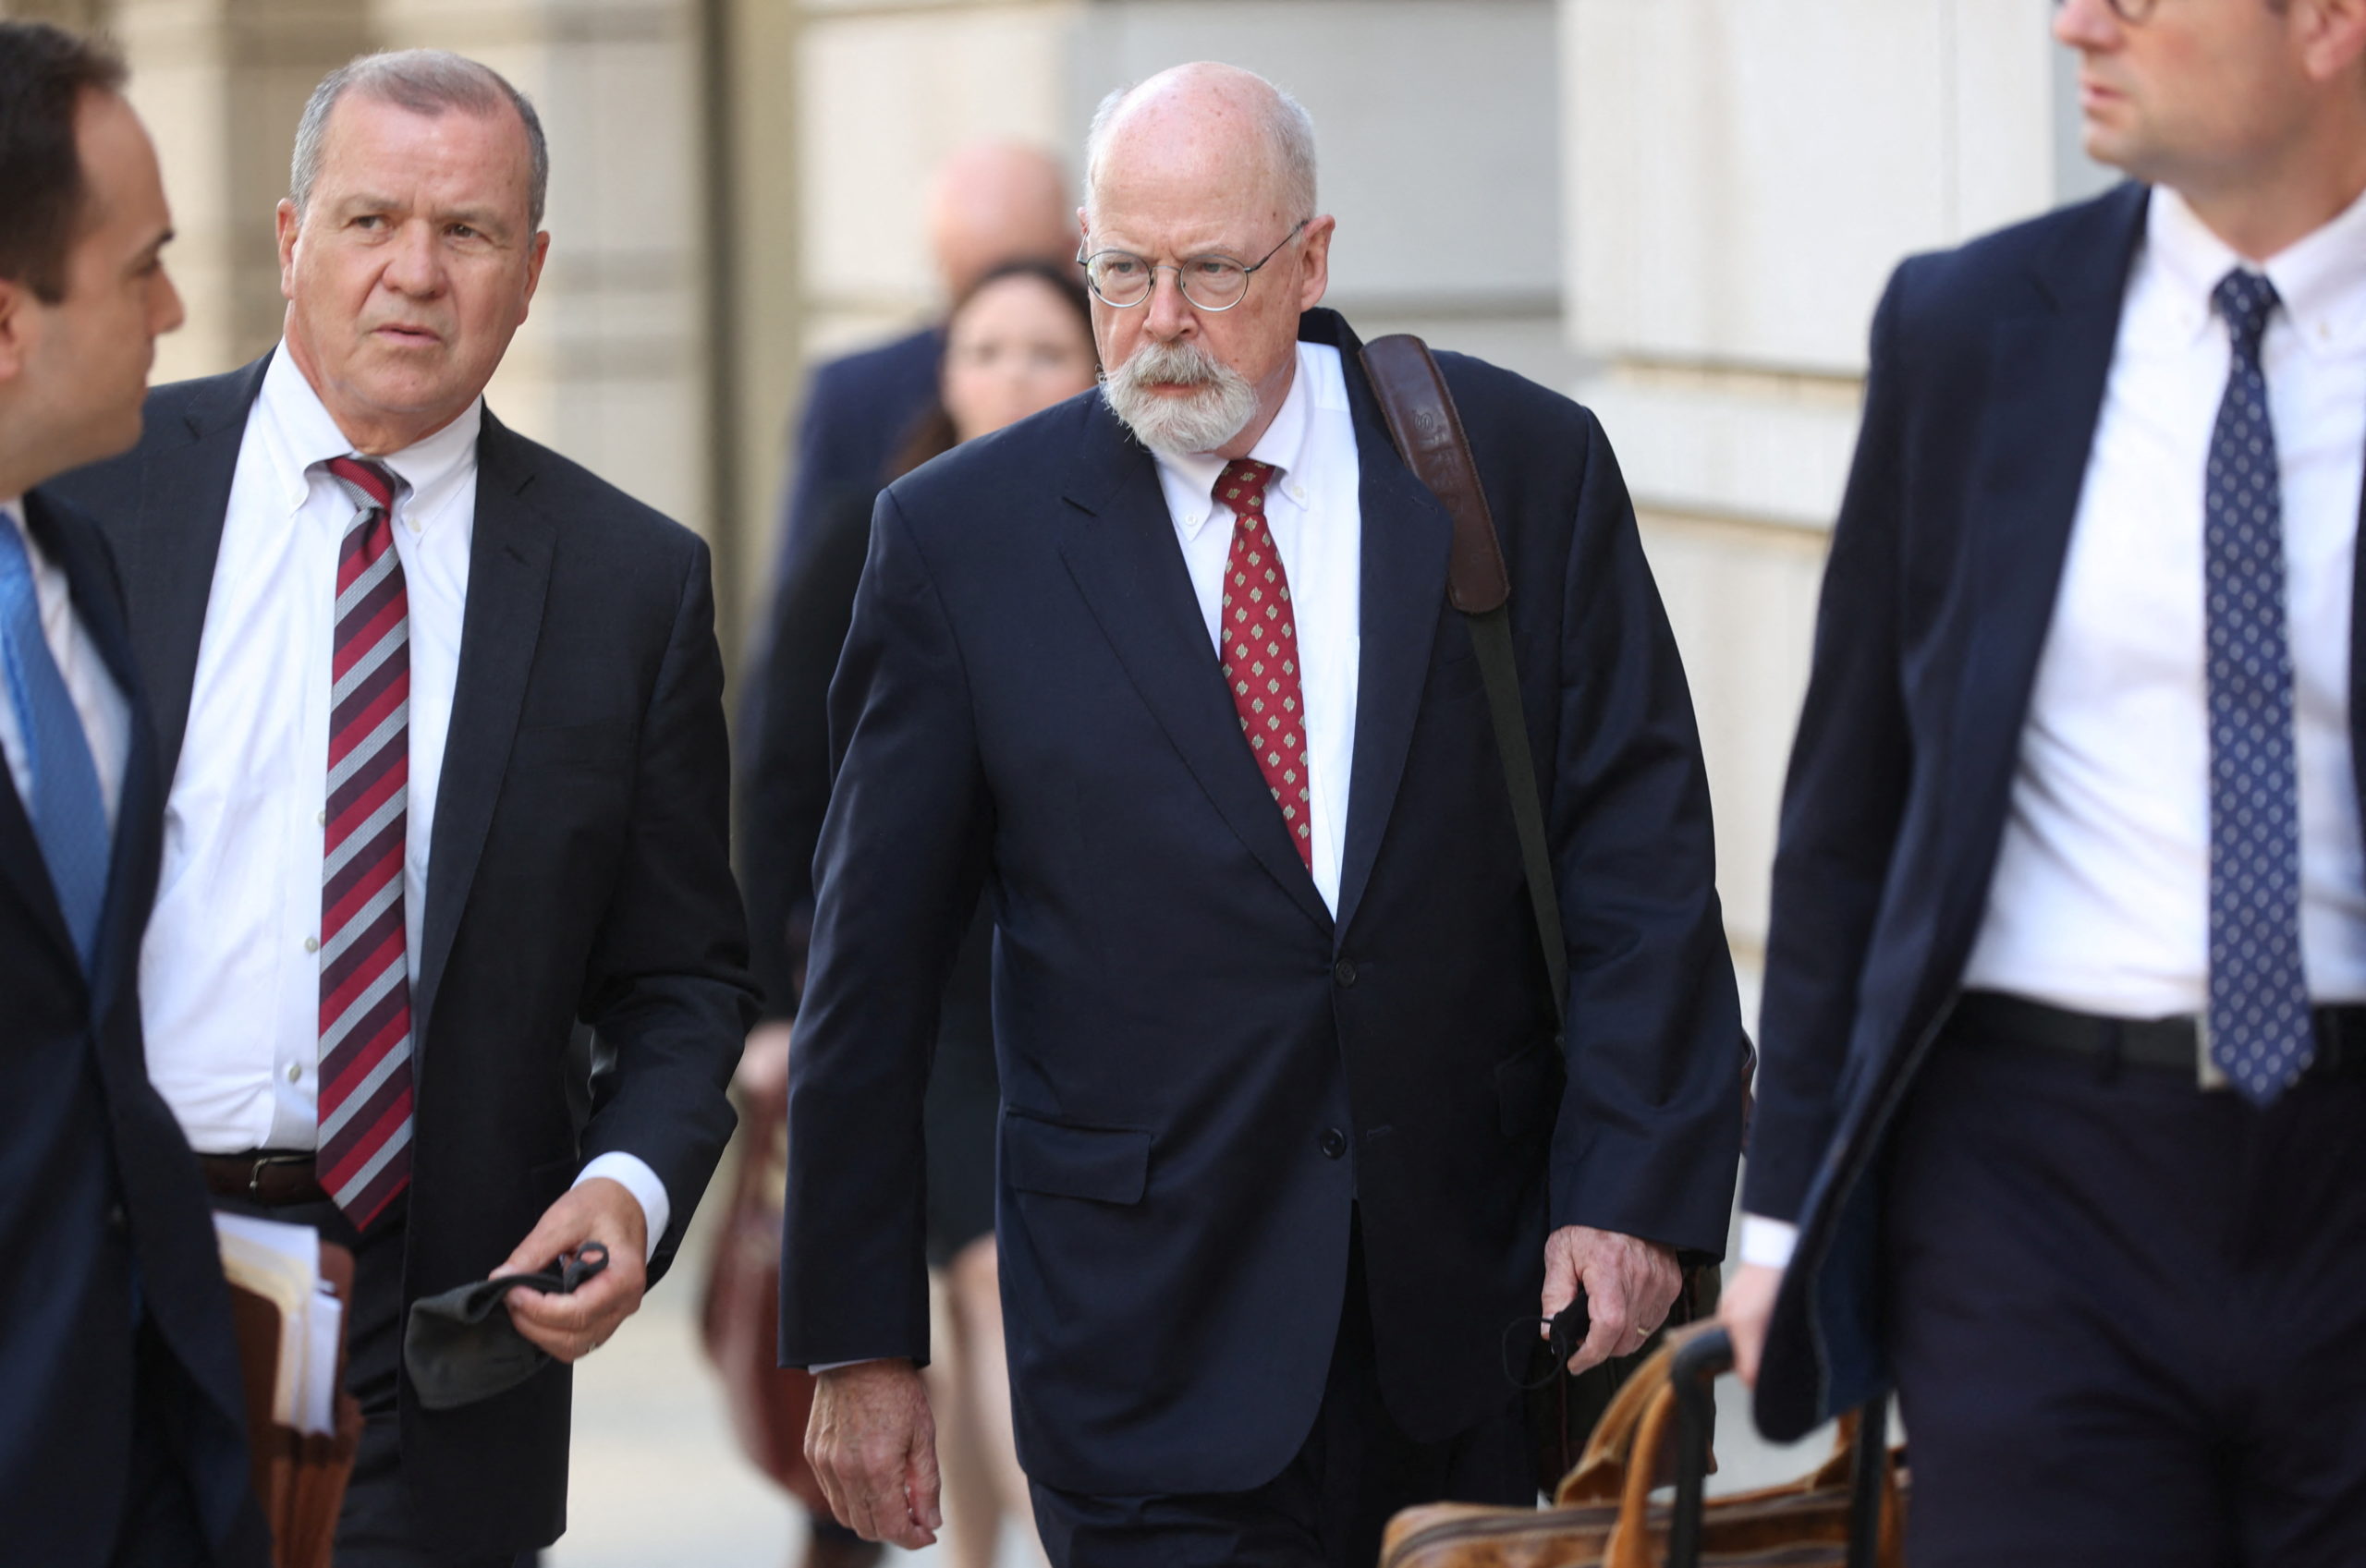 Special Counsel John Durham departs the U.S. Federal Courthouse with prosecutors and staff after opening arguments in the trial of Attorney Michael Sussmann, where Durham is prosecuting Sussmann on charges that Sussmann lied to the Federal Bureau of Investigation (FBI) while providing information about later discredited allegations of communications between the 2016 presidential campaign of former U.S. President Donald Trump and Russia, in Washington, U.S. May 17, 2022. REUTERS/Julia Nikhinson